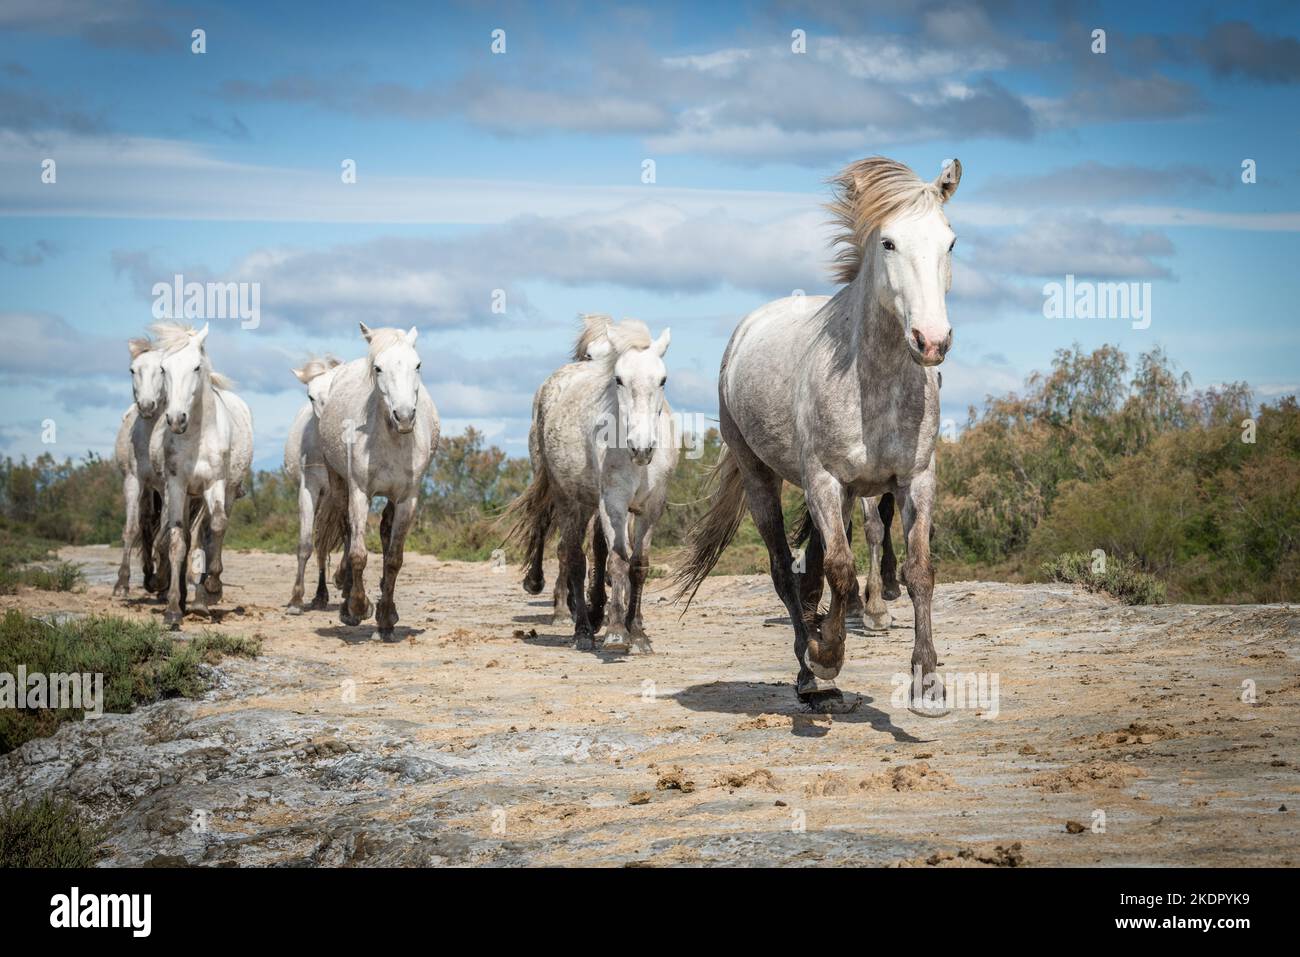 Herd of white horses are taking time on the beach. Image taken in Camargue, France. Stock Photo